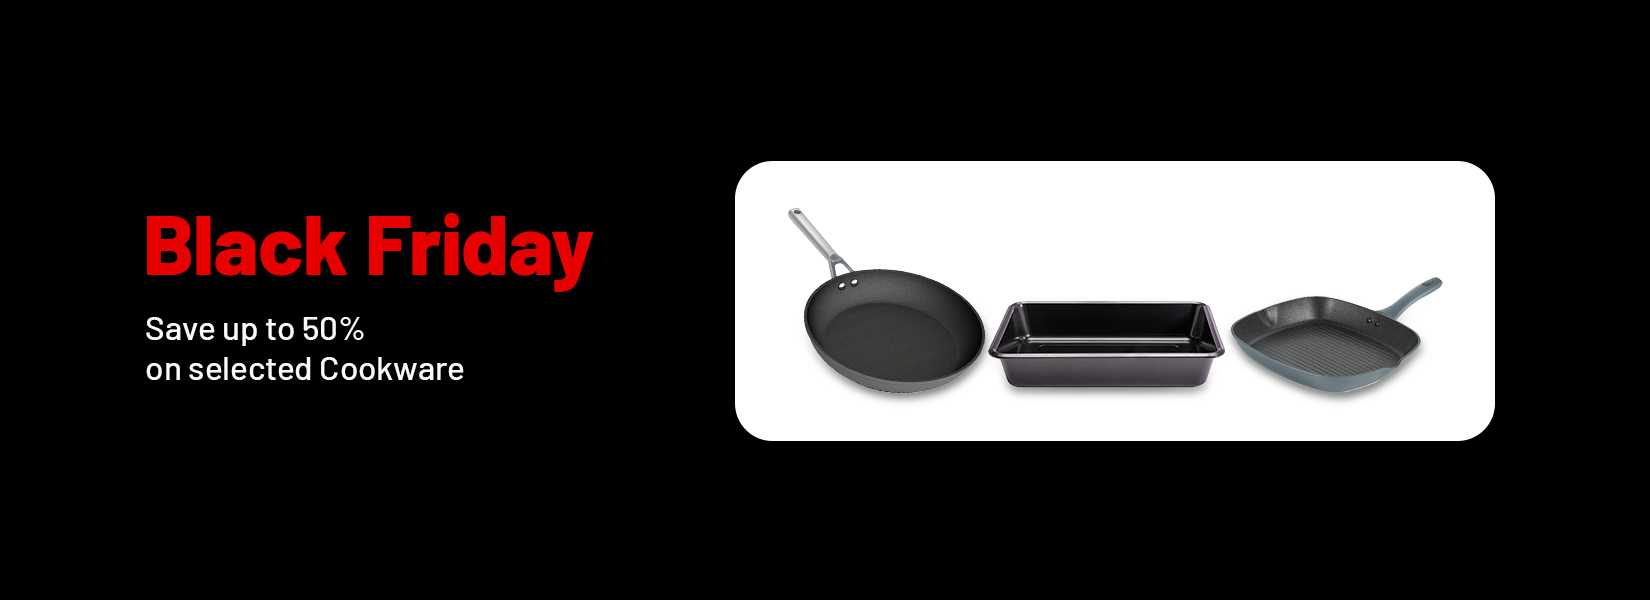 Black Friday. Save up to 50% on selected cookware.